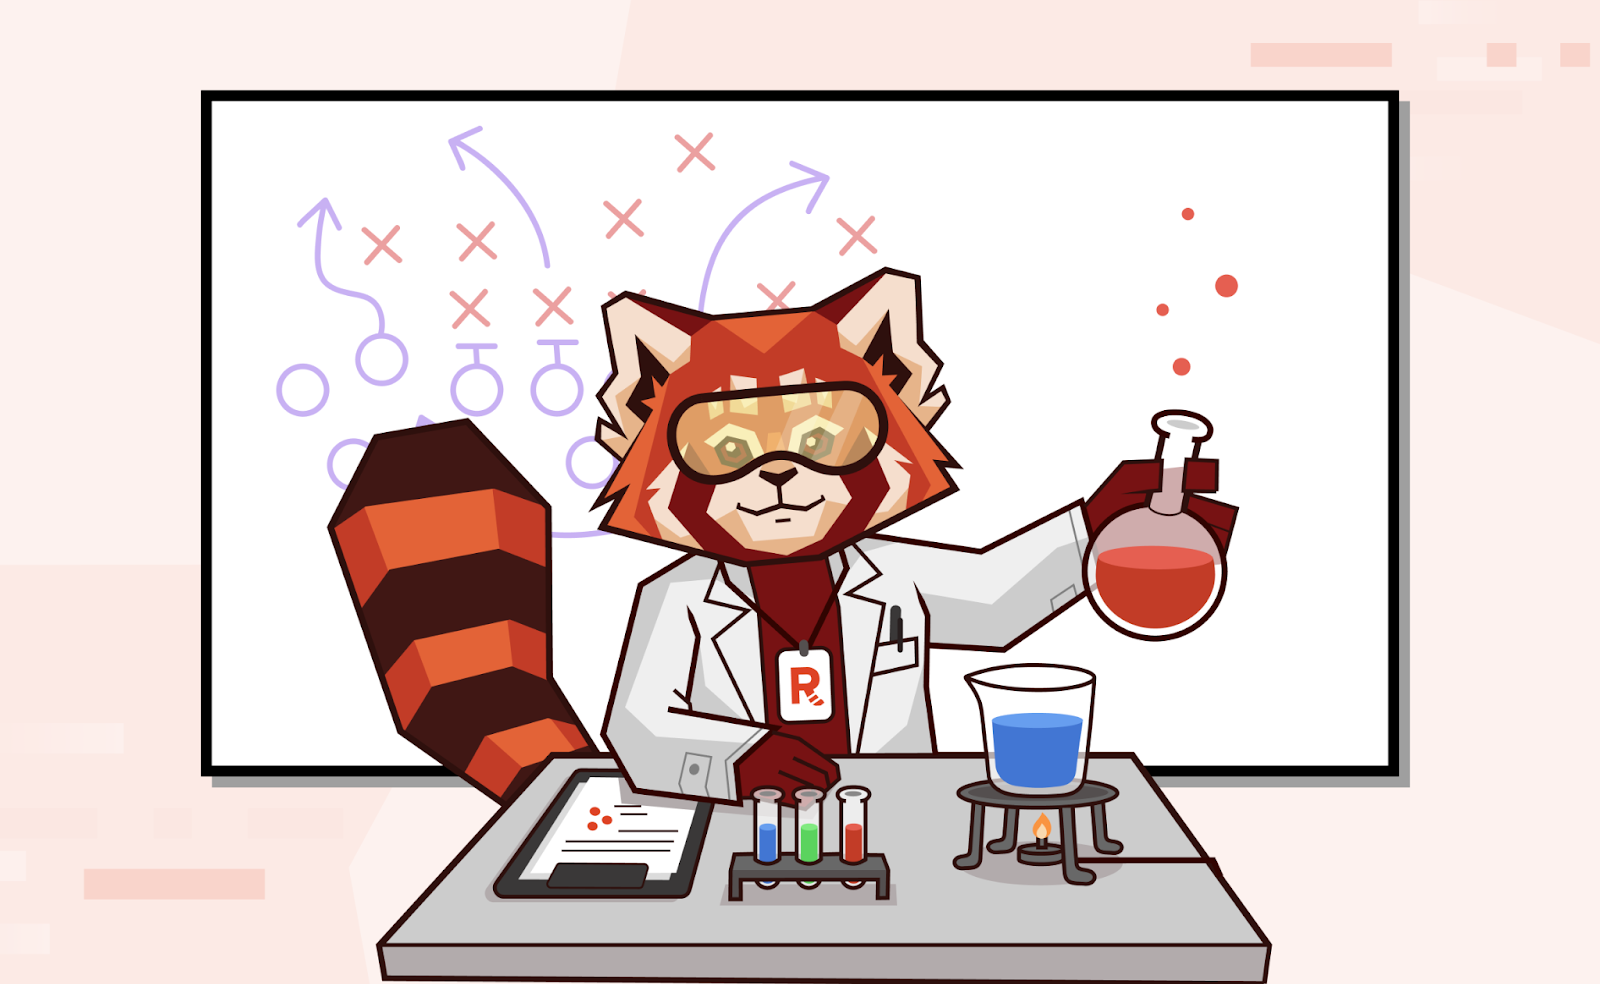 Introducing Redpanda Labs - a hub for streaming data examples and experiments